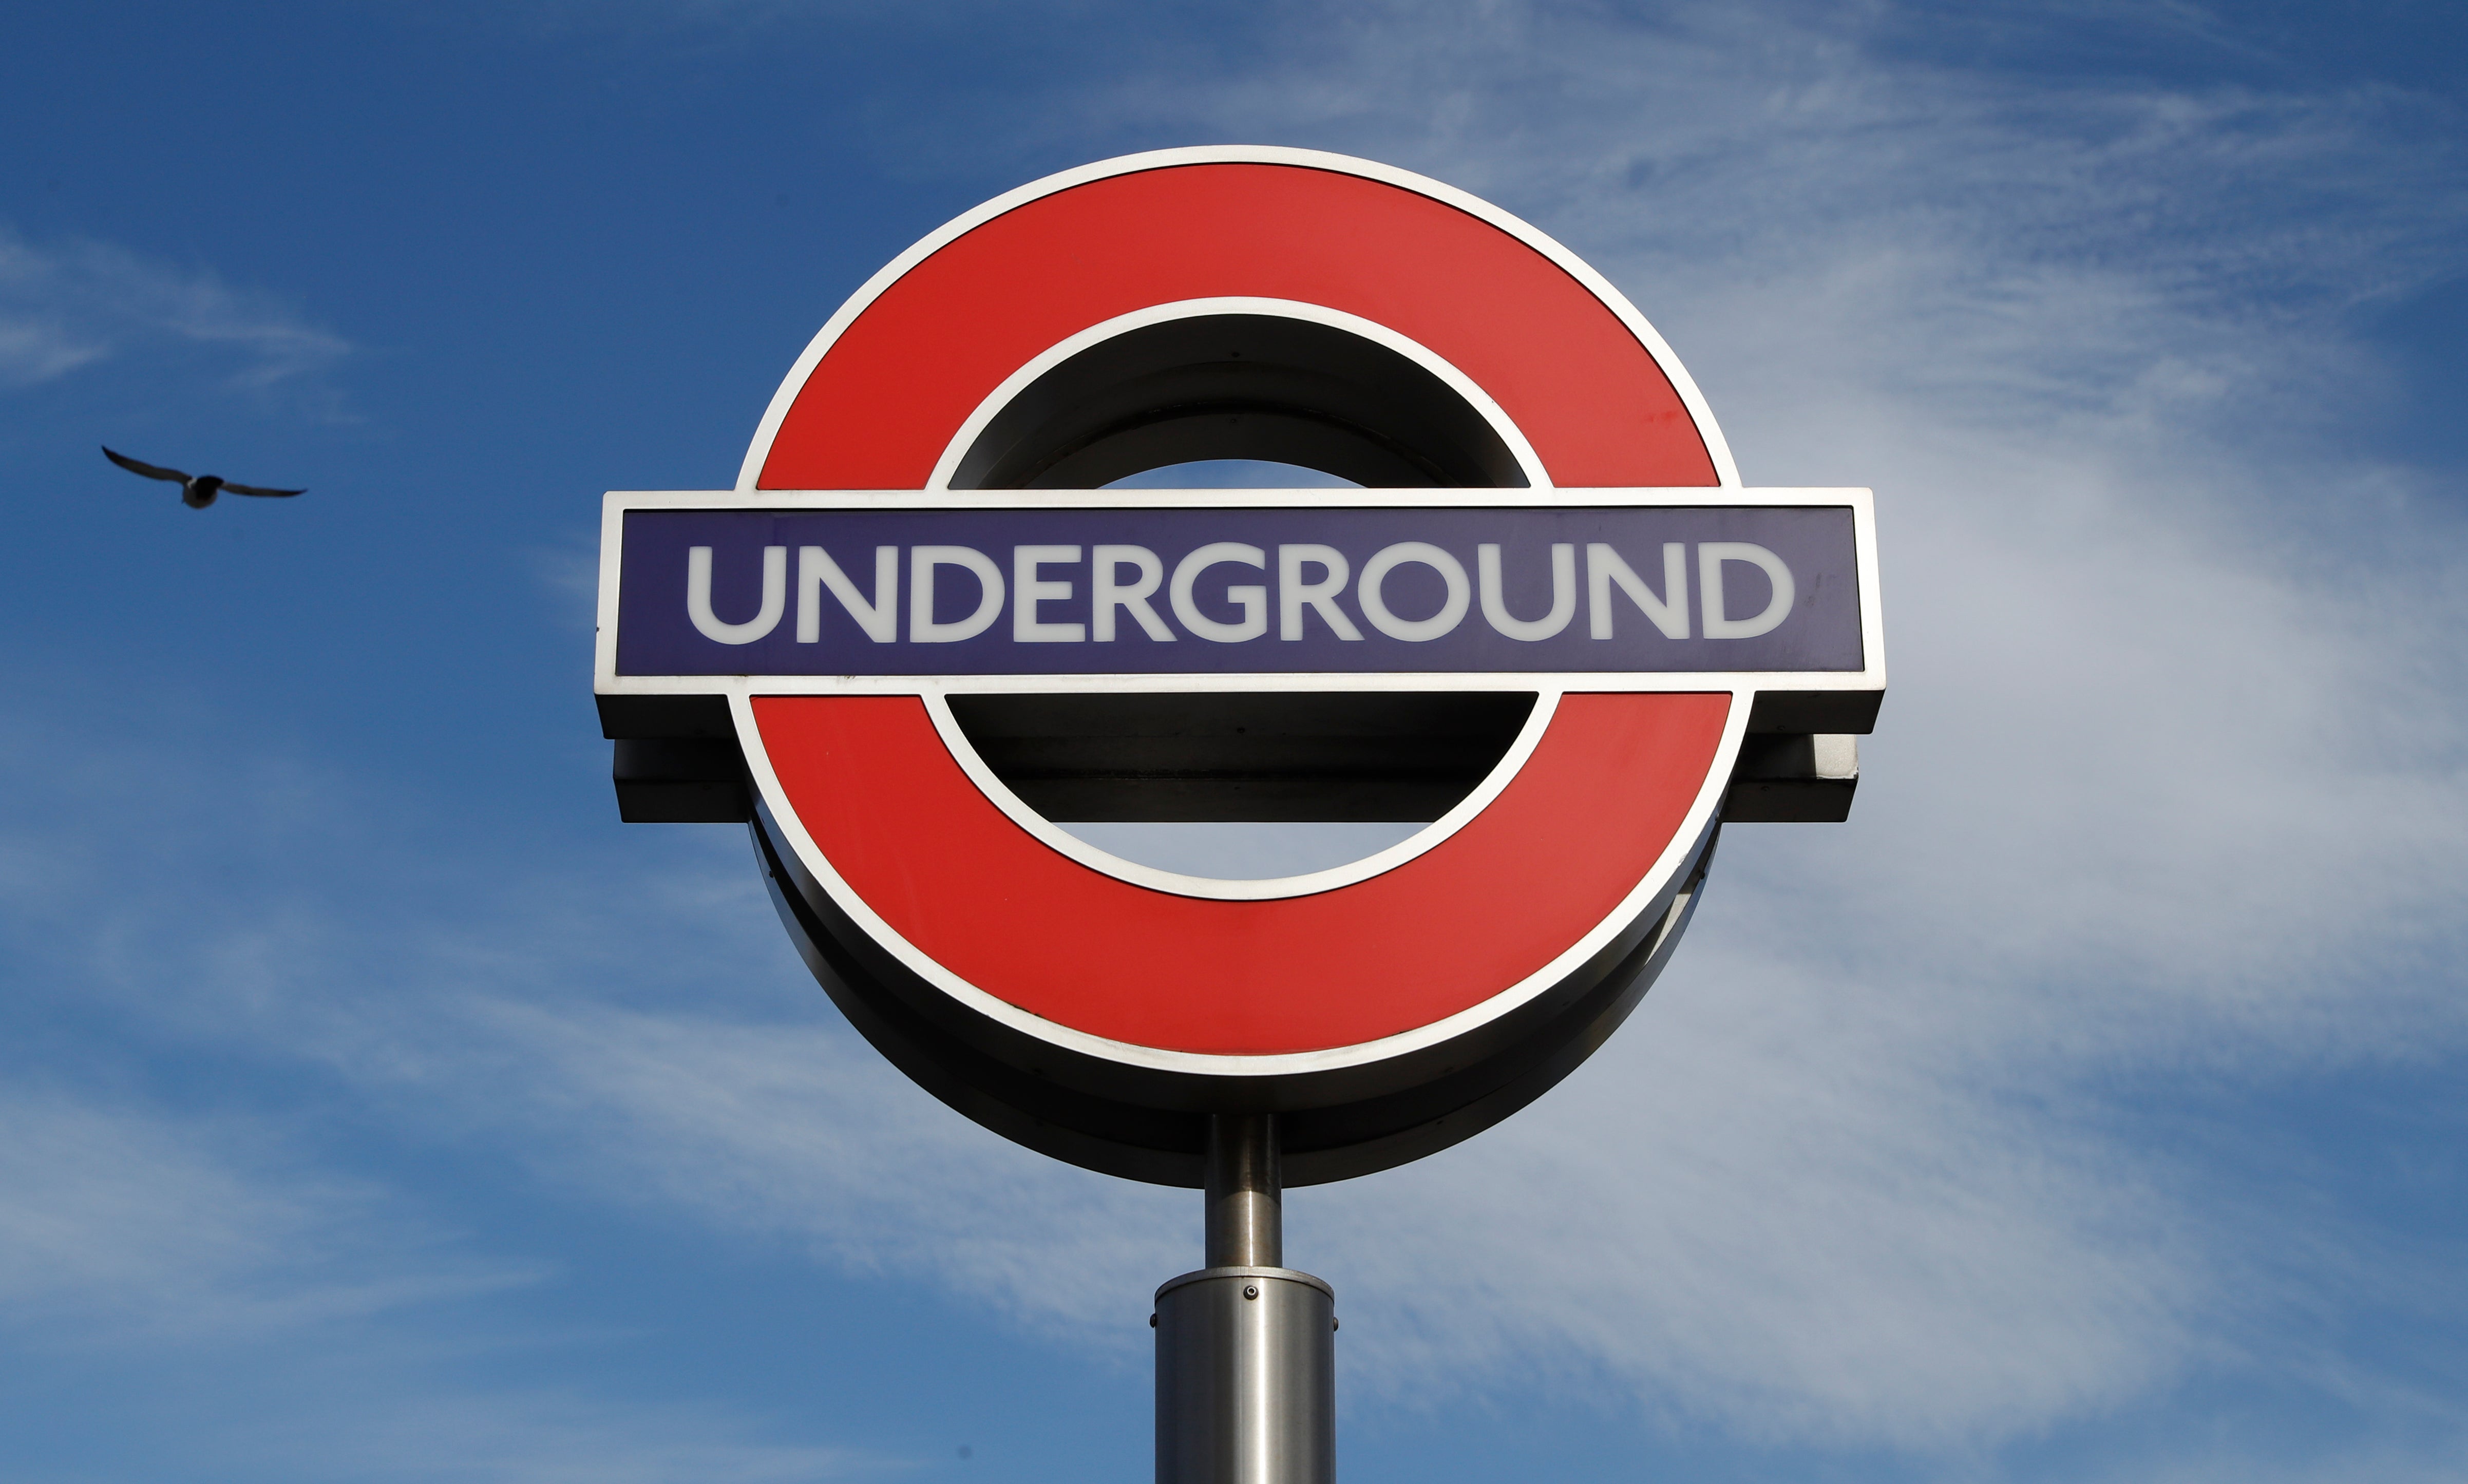 London Beyond the Pandemic - The Tube